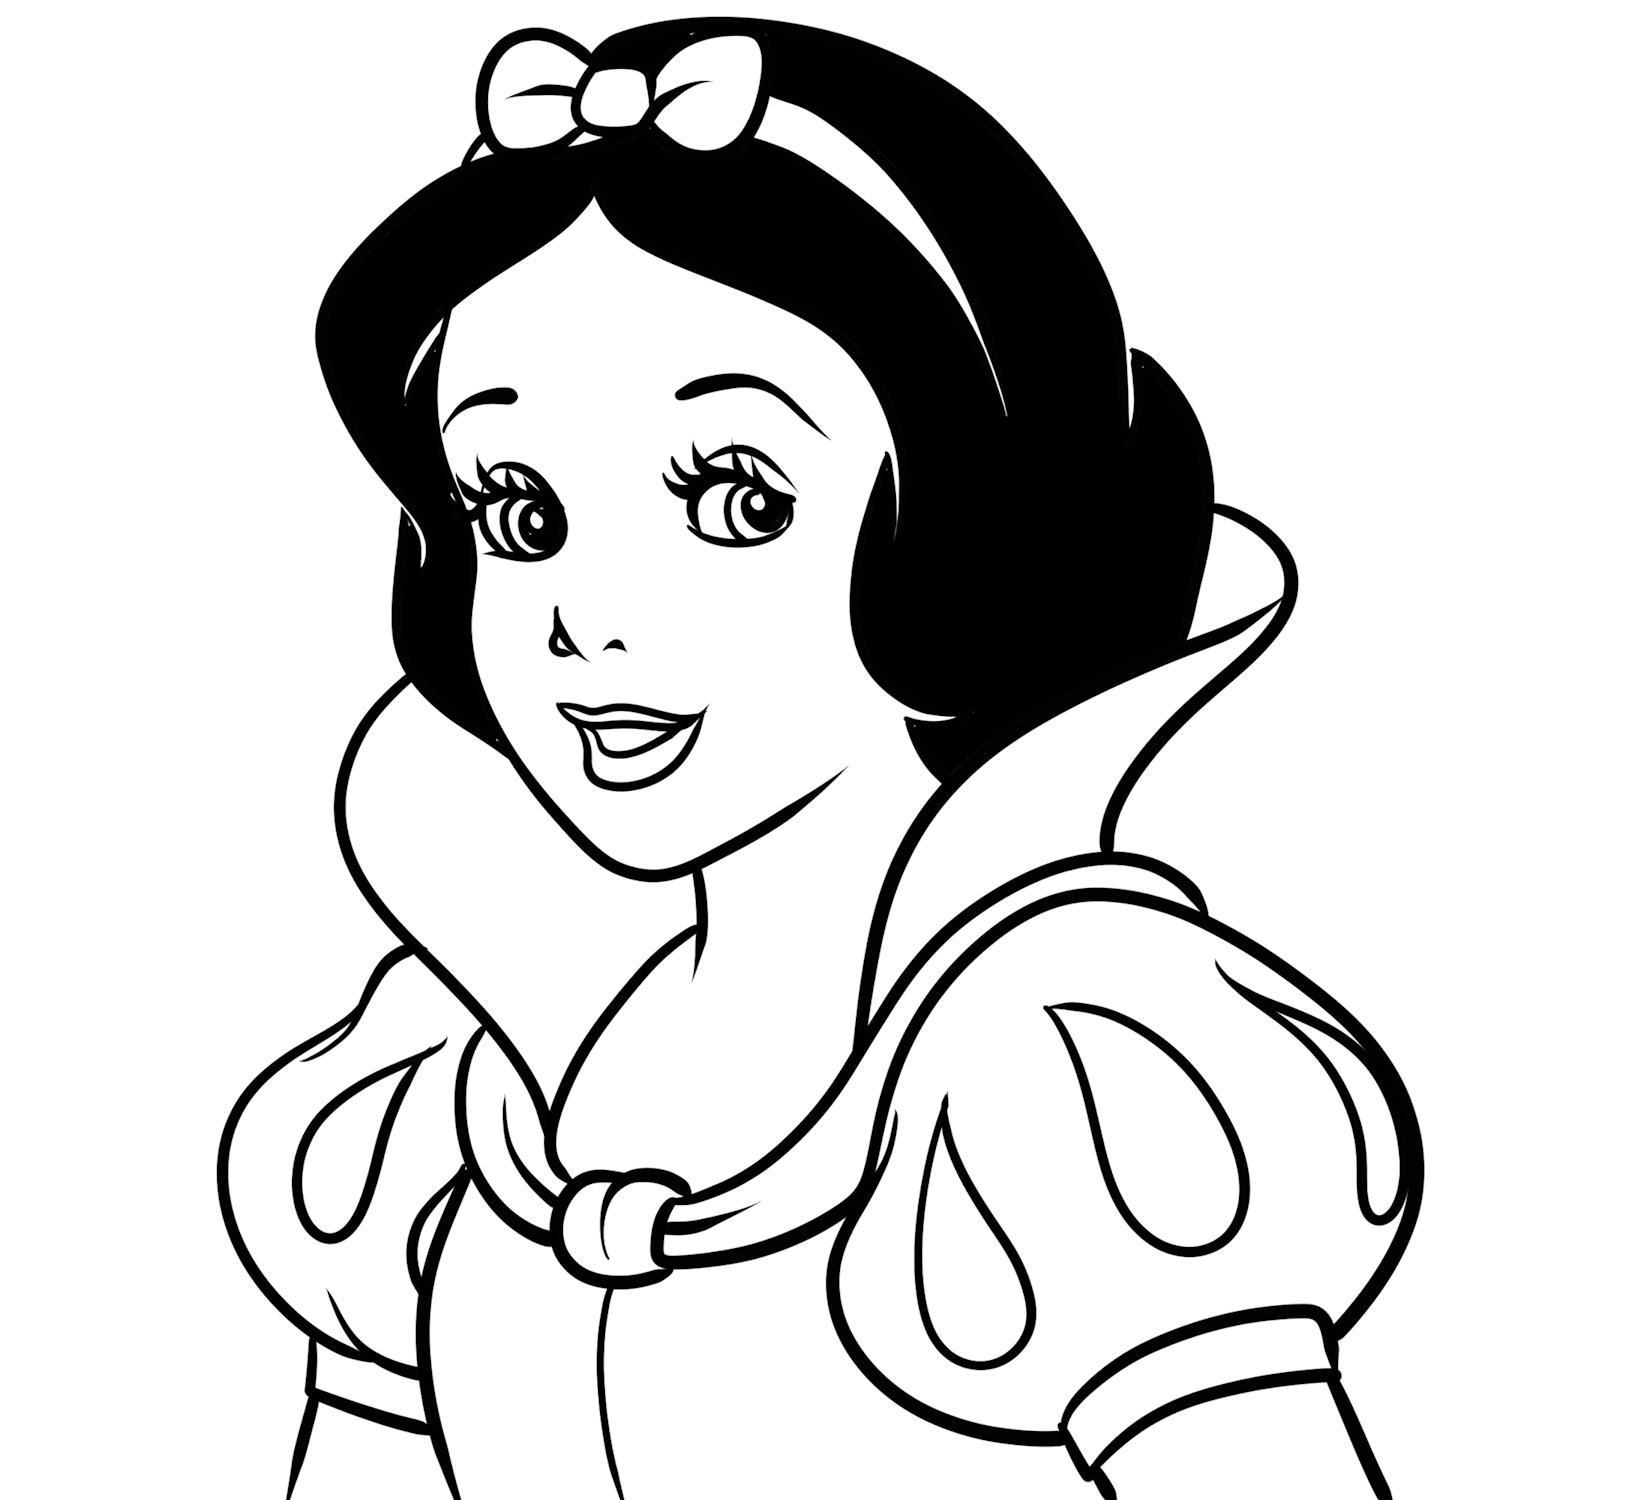 Snow White coloring pages